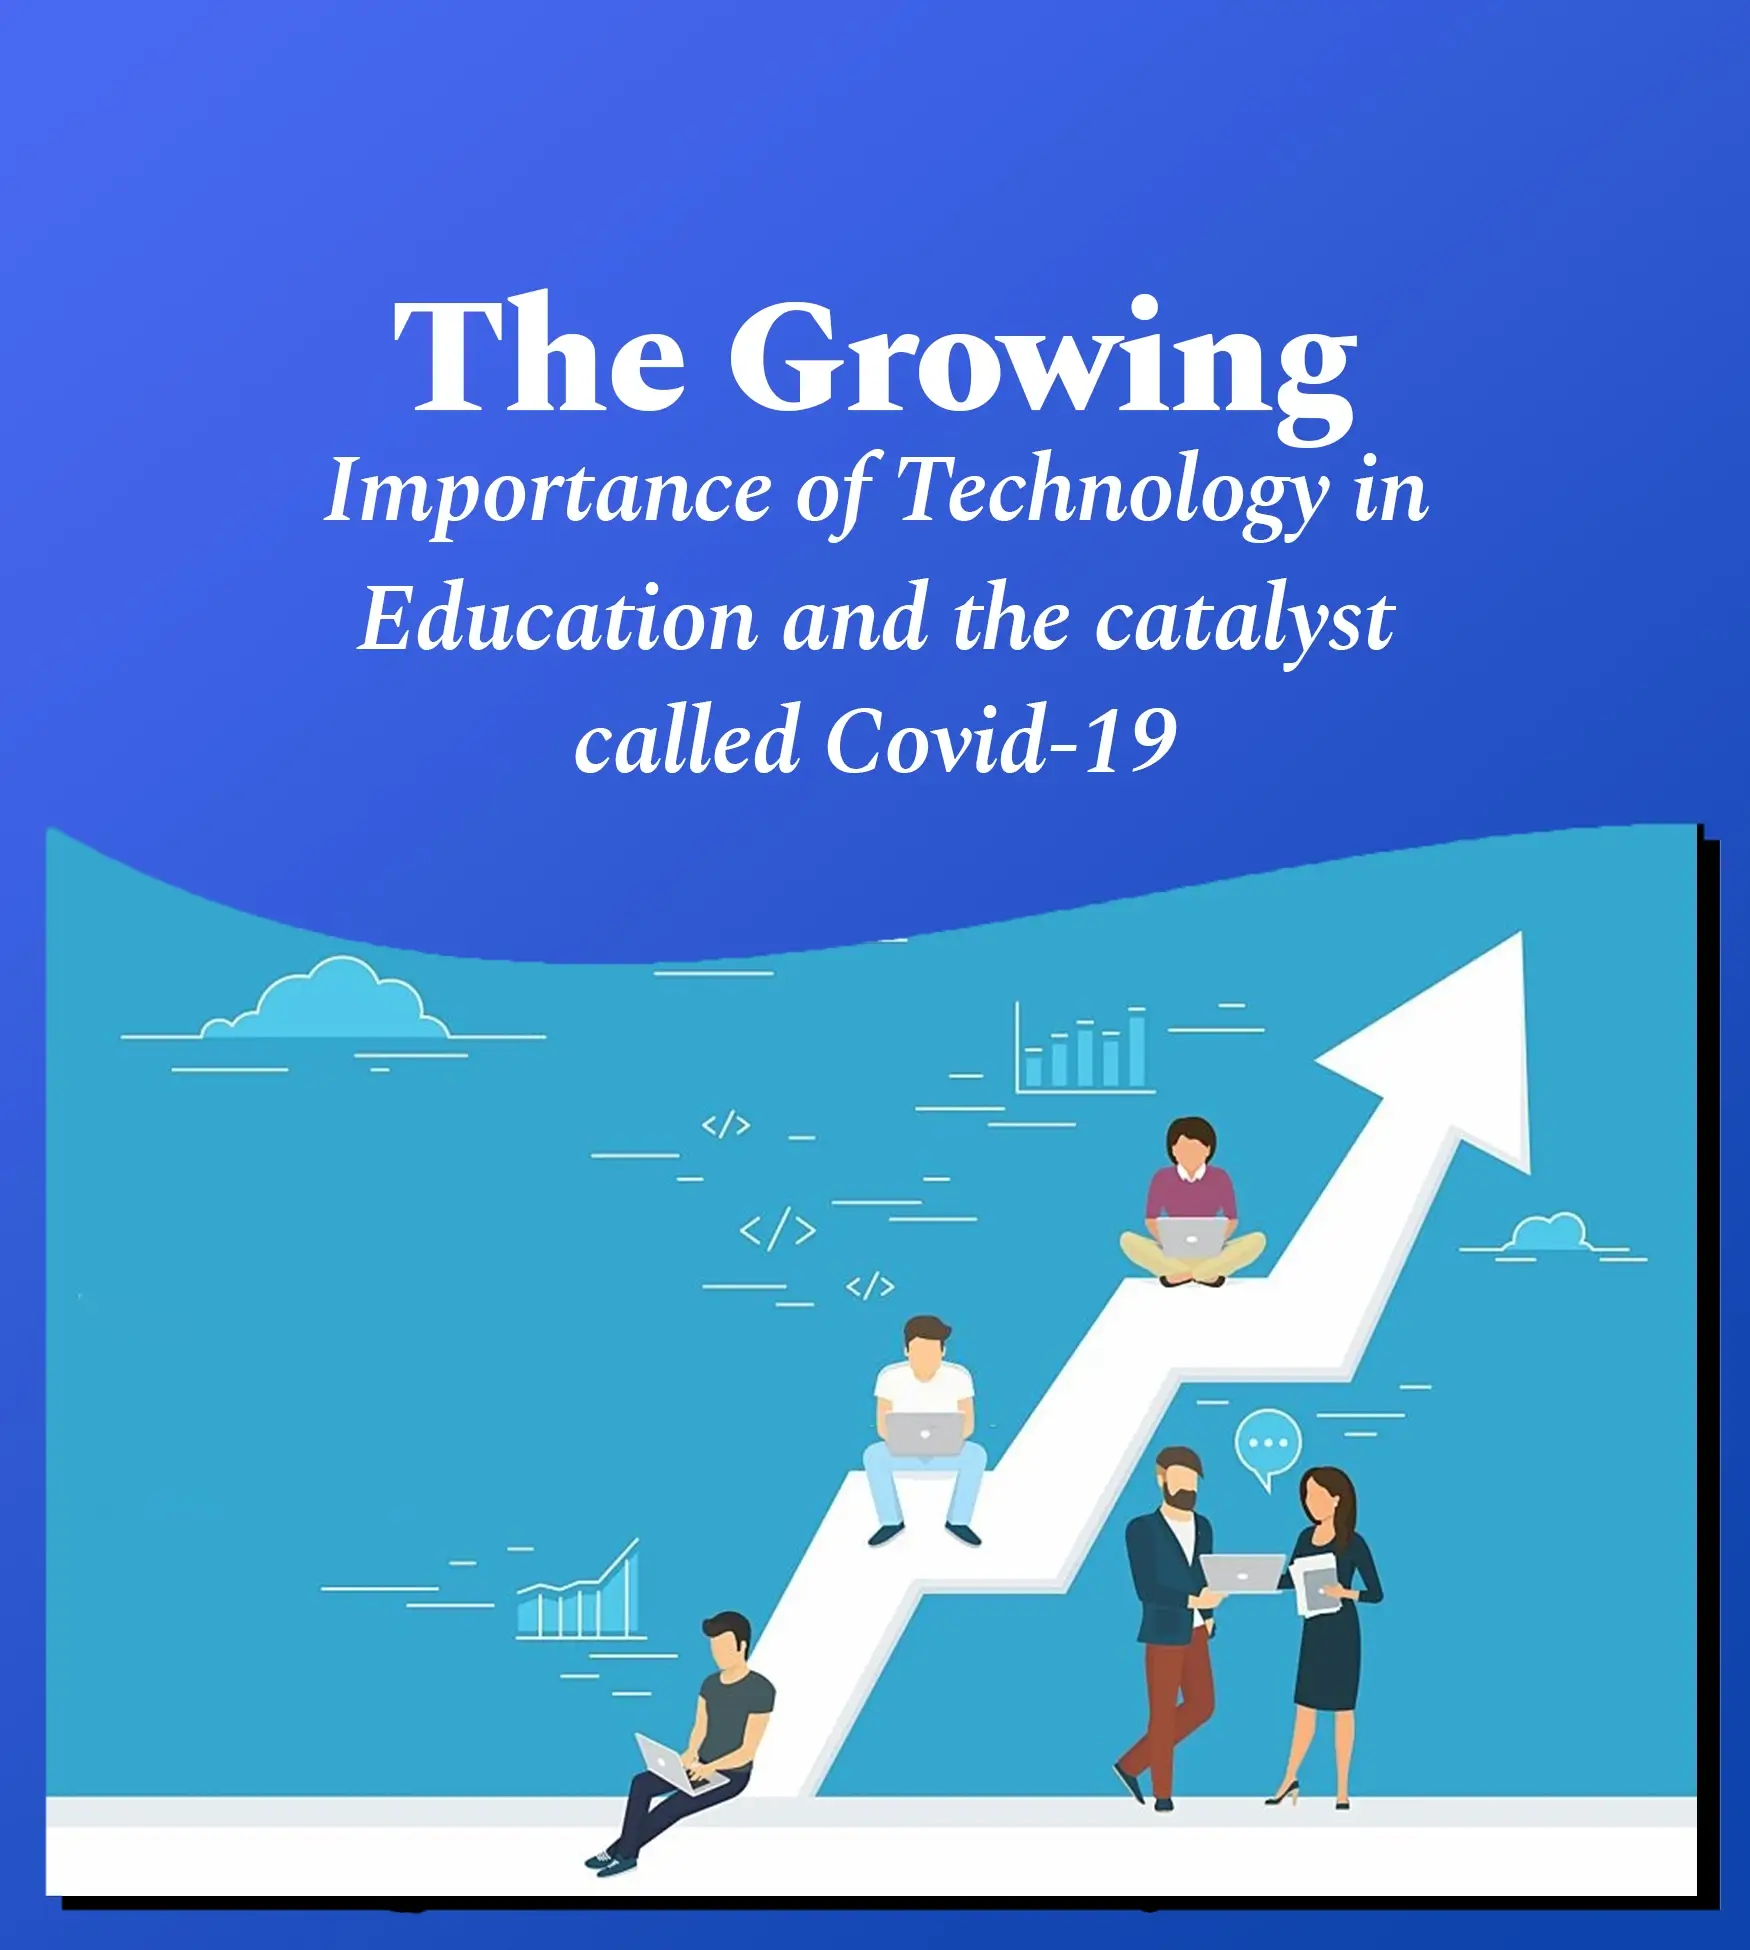 The Importance of Technology in Education during Covid 19 2jpeg